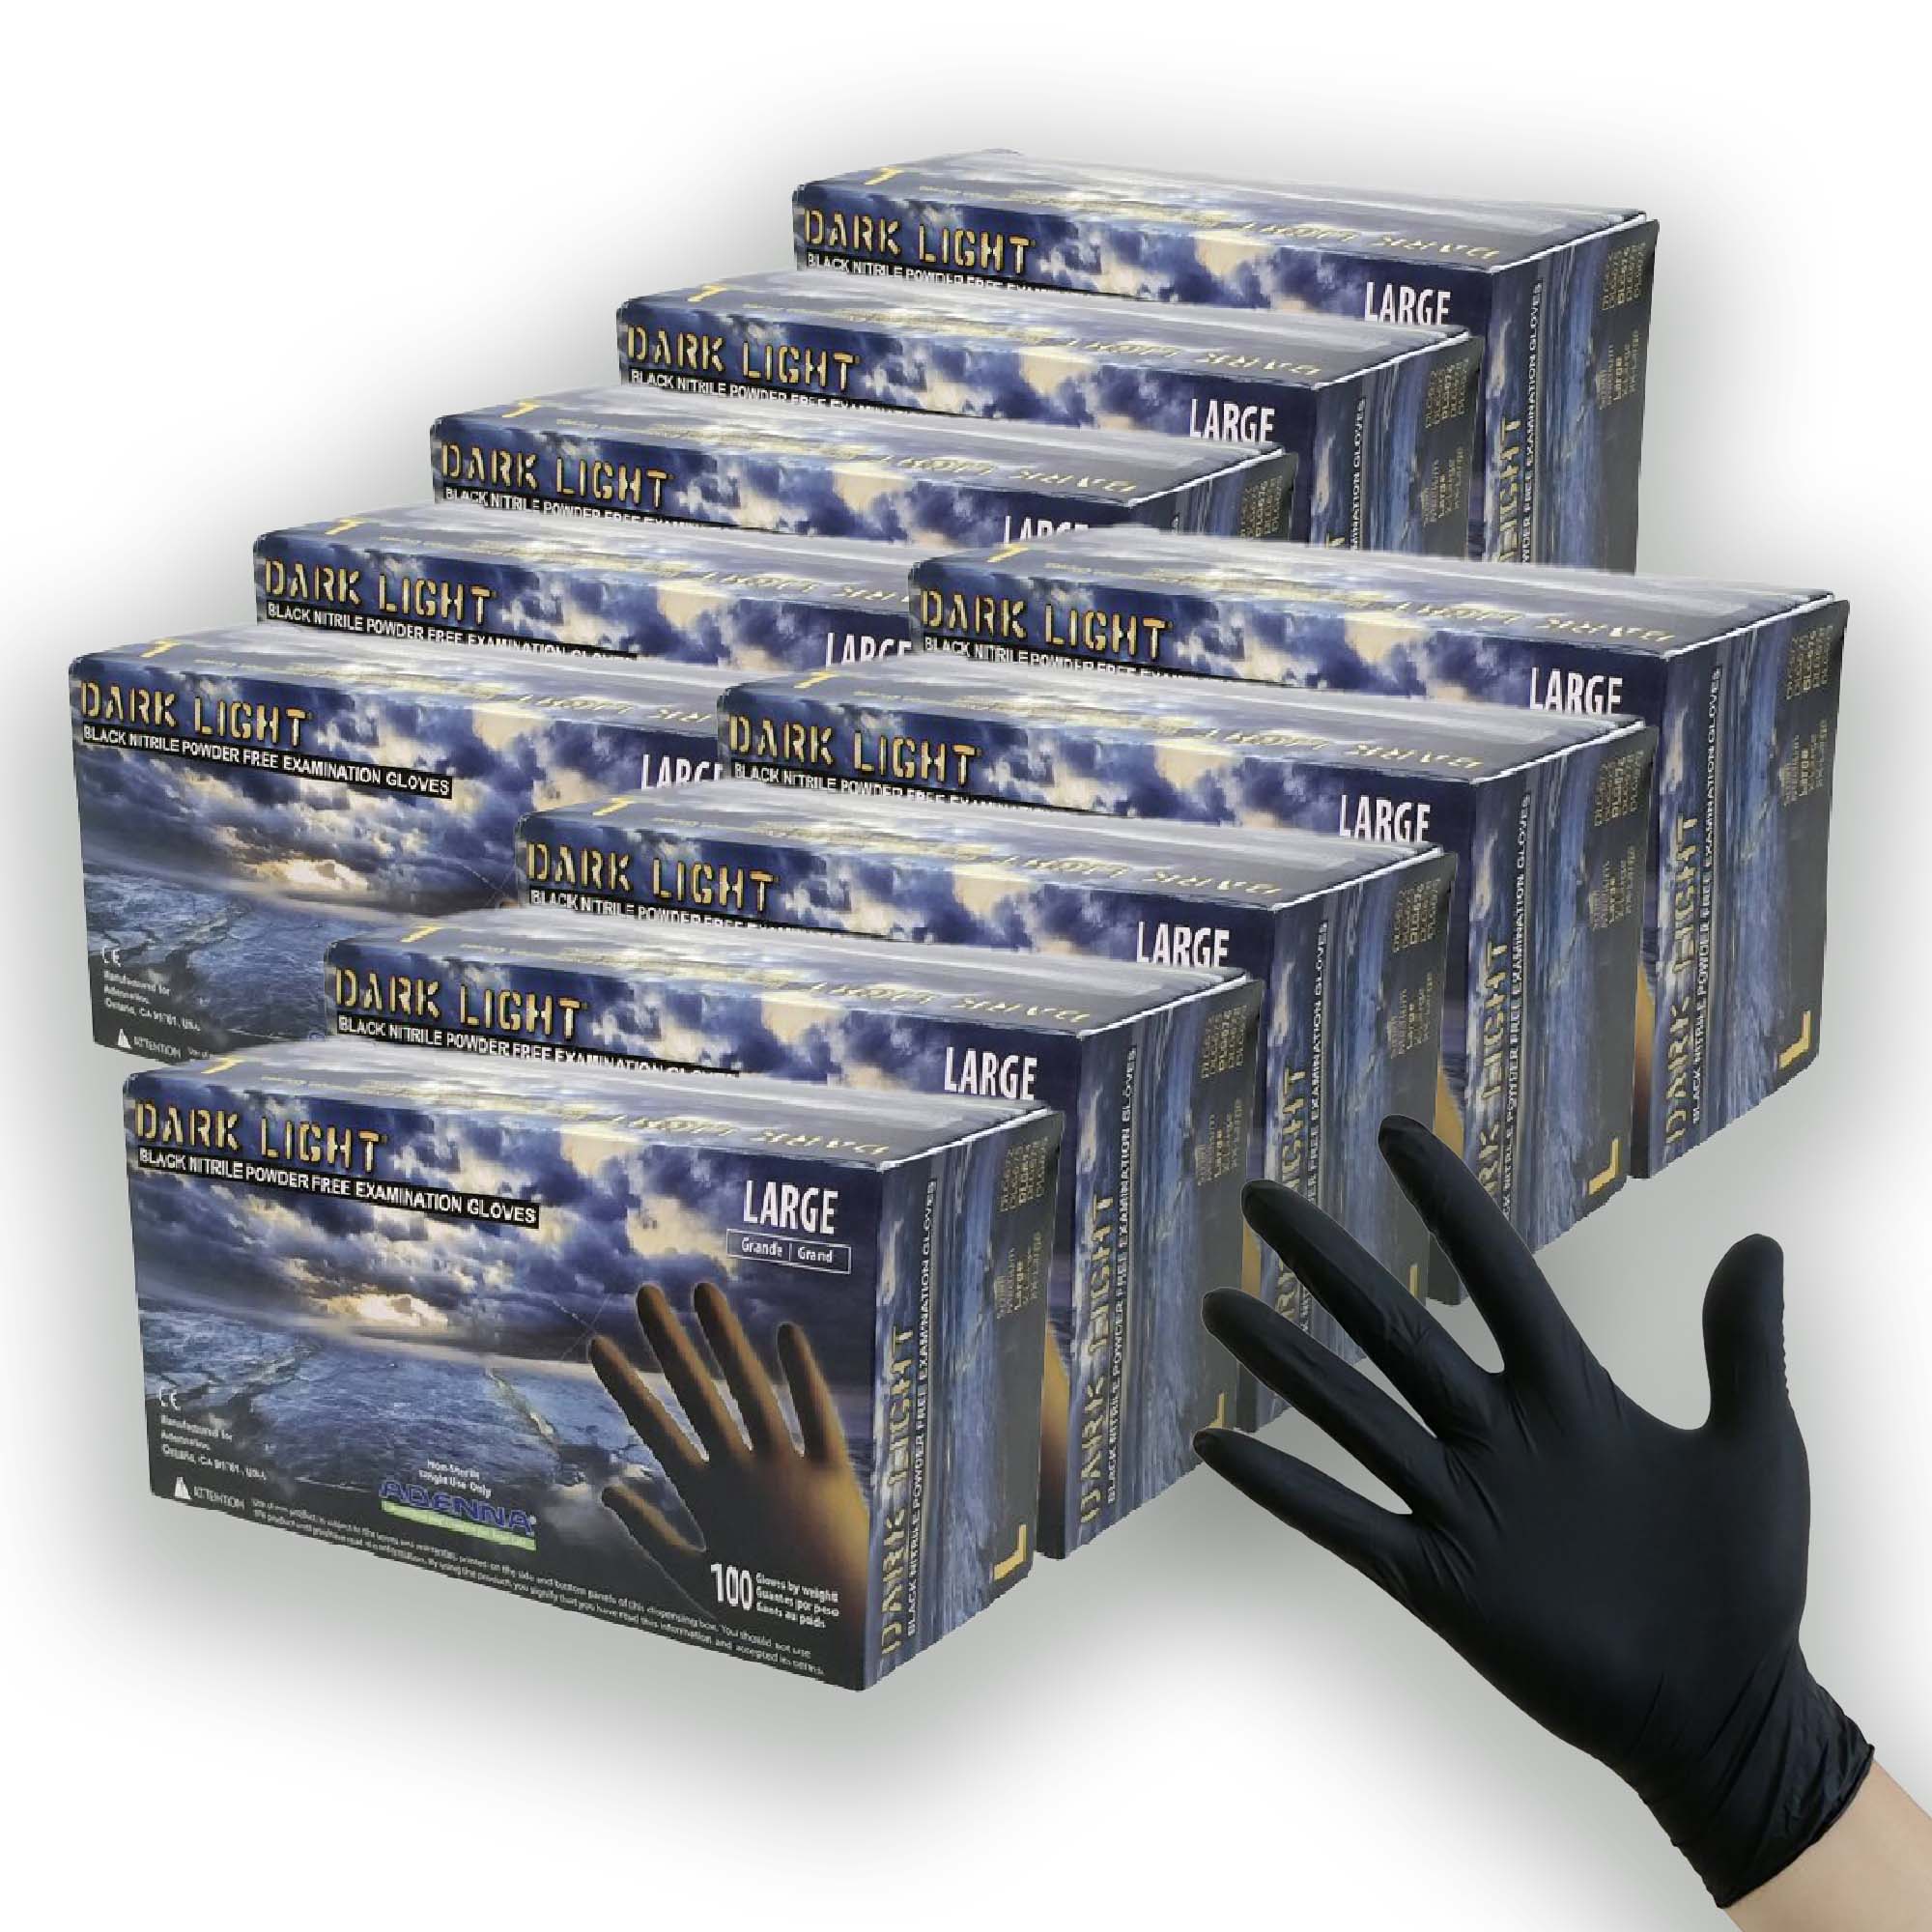 10 boxes of Dark Light Black Gloves (powder free and examination grade) in 9 mil thickness